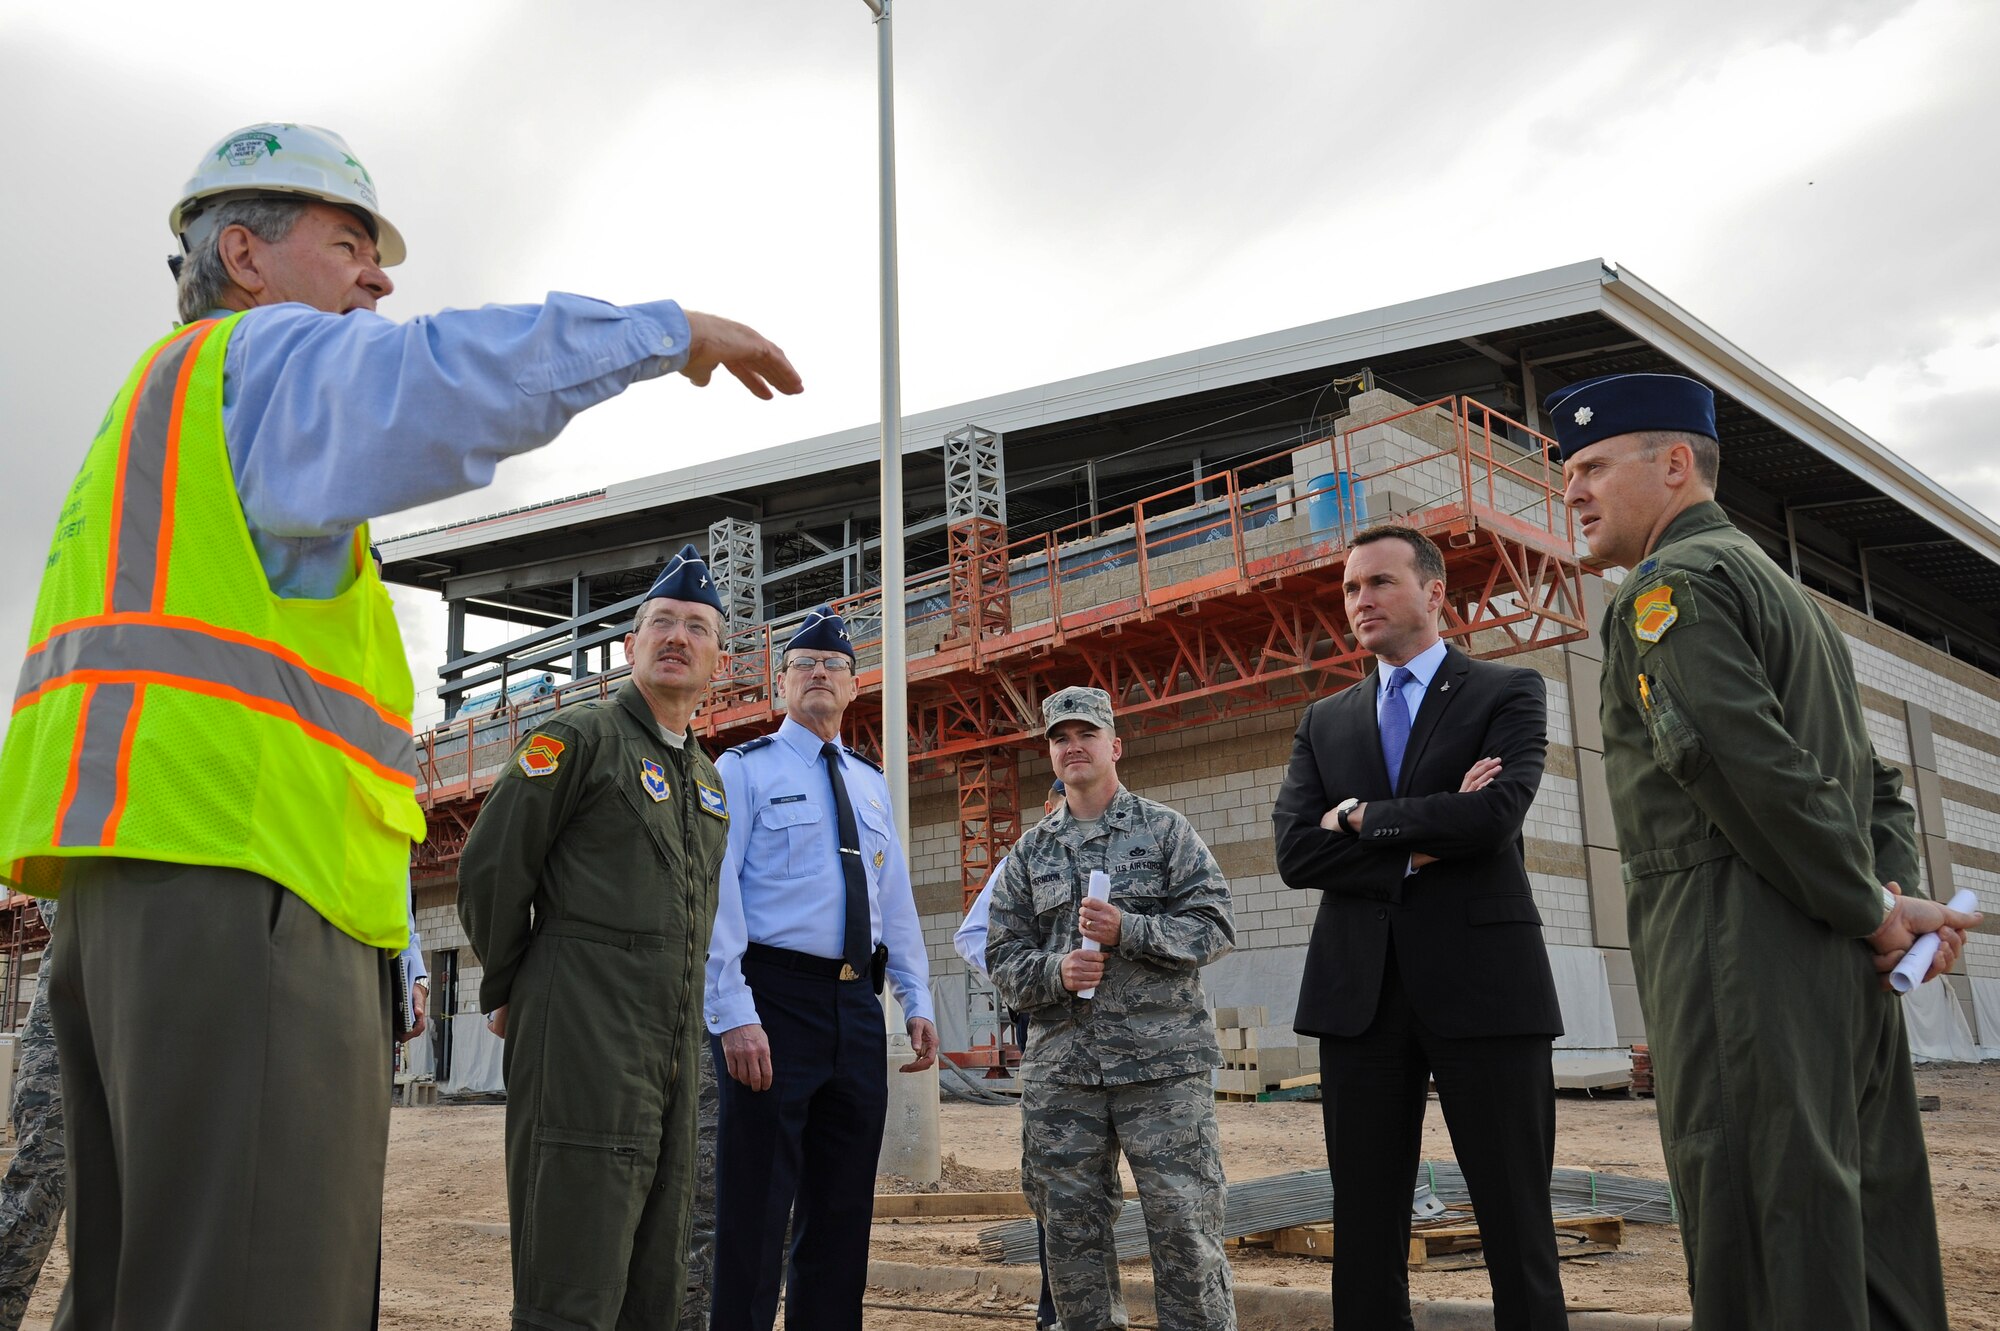 Undersecretary of the Air Force Eric Fanning is briefed by Craig Killmer, Archer Western Contractors project manager, during a tour of the Academic Training Center construction site on March 14 at Luke Air Force Base. The 145,000 square-foot facility will include pilot academic training classrooms, 12 F-35 simulators, a secured briefing auditorium, and space for administrative, instructor and engineering personnel. Accompanying Fanning on the tour is Brig. Gen. Michael Rothstein, 56th Fighter Wing commander, Maj. Gen. Richard Johnston, deputy undersecretary of the Air Force for International Affairs, Lt. Col. Ken Herndon, 56th Civil Engineer Squadron commander, and Lt. Col. Matthew Liljenstolpe, 56th Training Squadron commander. (U.S. Air Force photo by Staff Sgt. Darlene Seltmann)